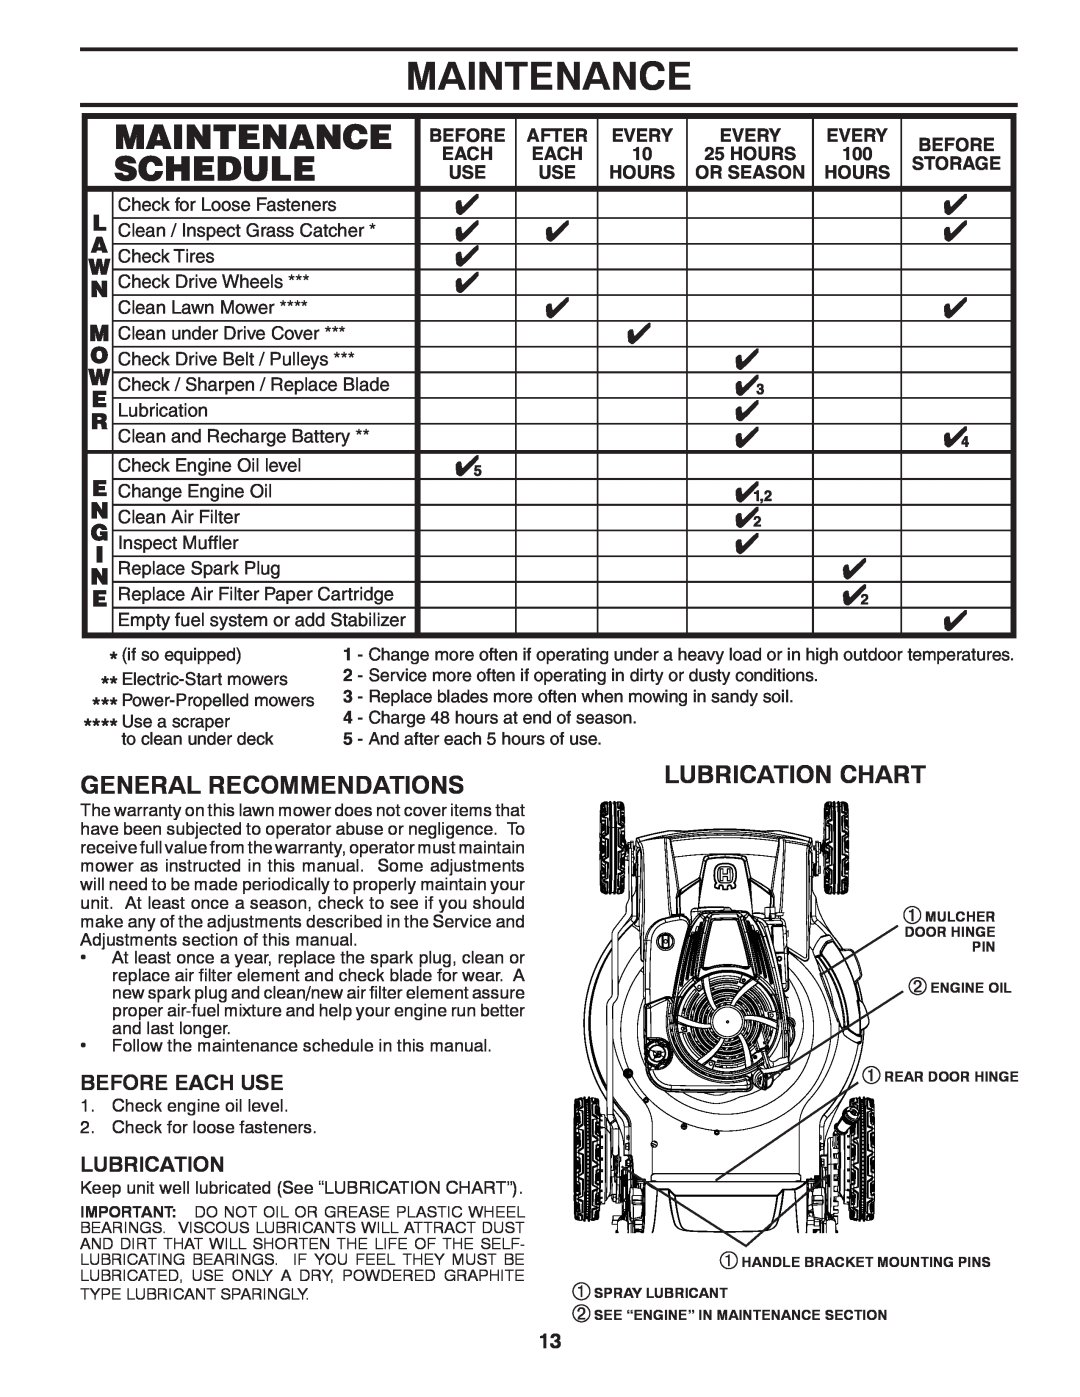 Husqvarna HU775H / 961450007 Maintenance, General Recommendations, Lubrication Chart, Before Each Use, After, Every, Hours 